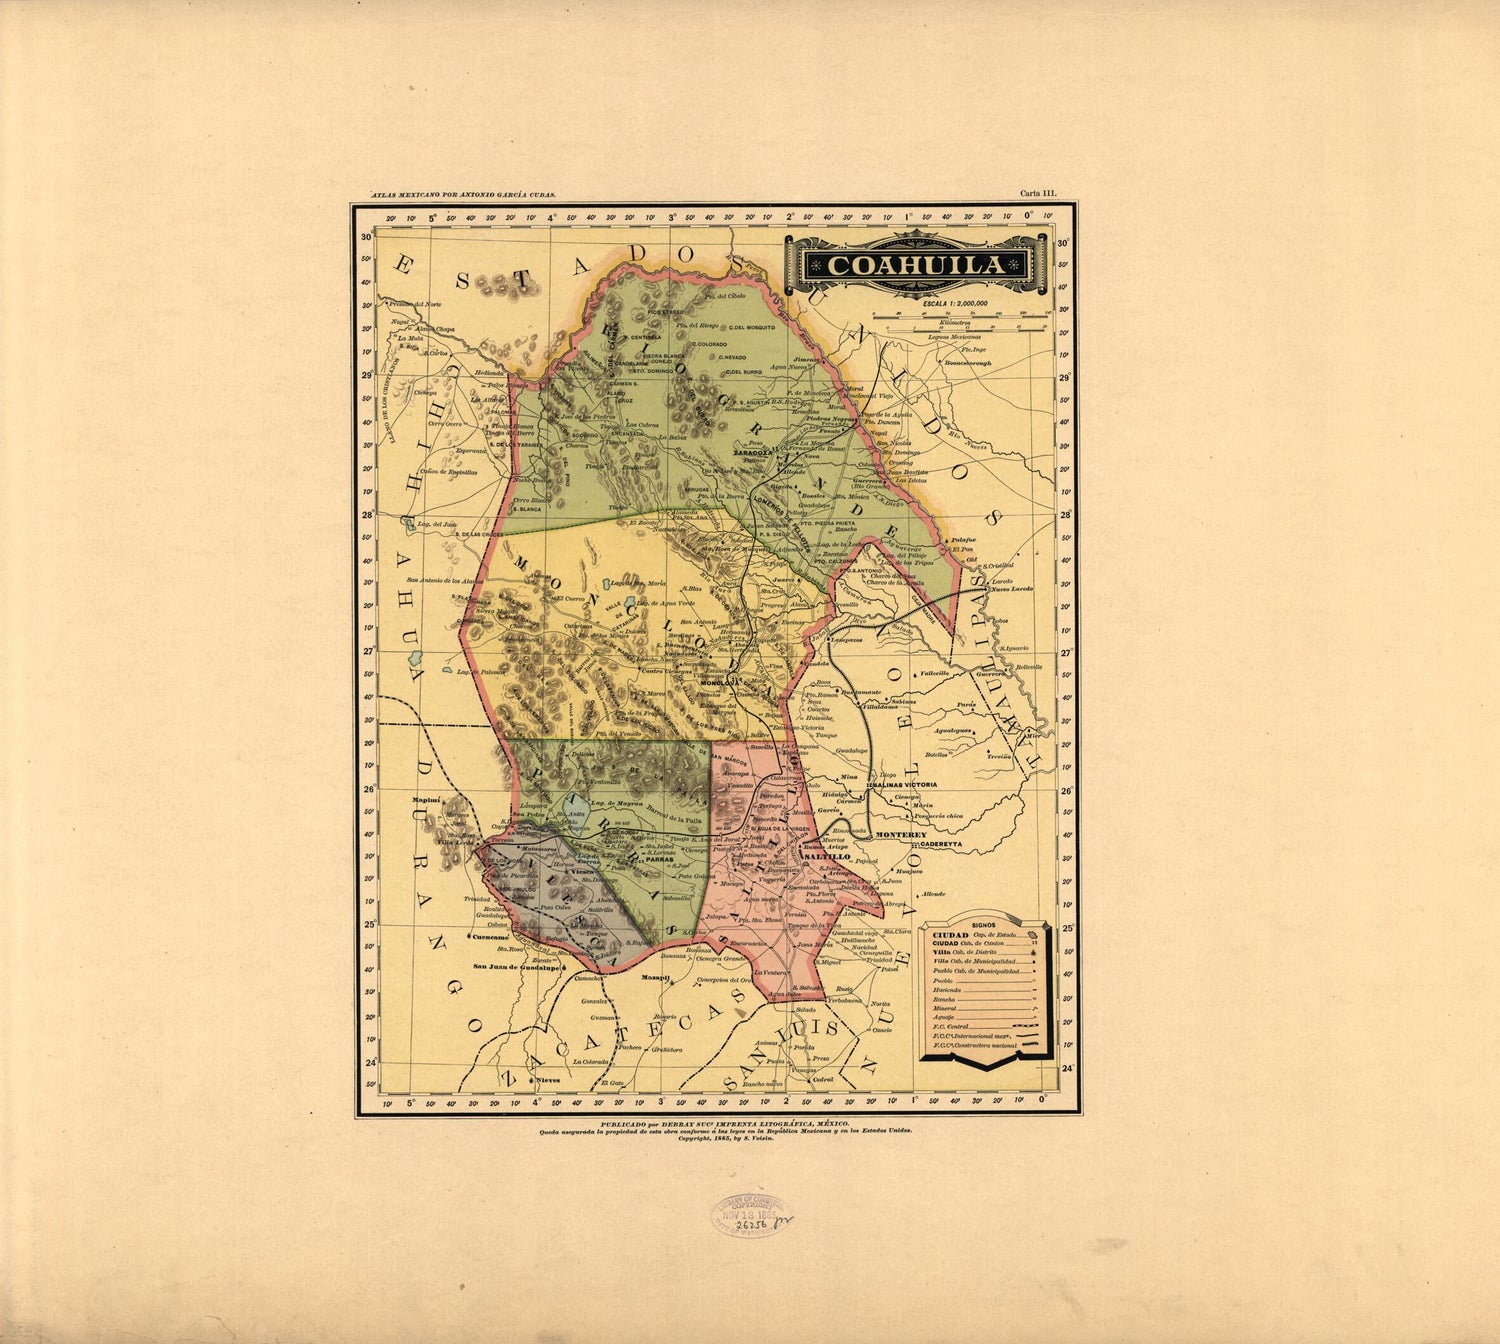 This old map of Coahuila from Atlas Mexicano. from 1884 was created by Antonio García Cubas in 1884